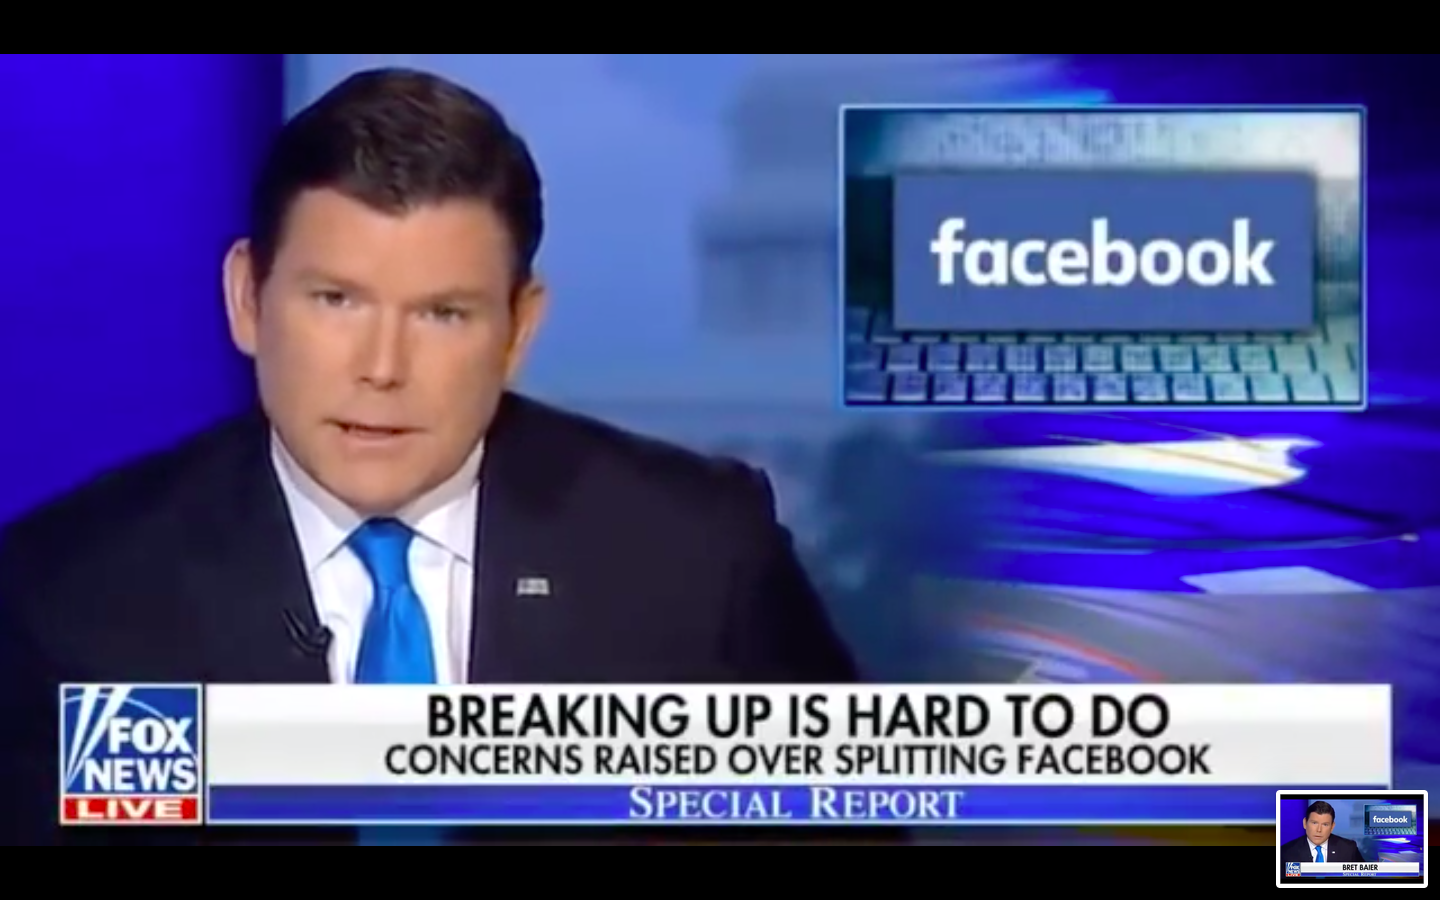 Fox News Lobbies Against Breaking Up Facebook In Propaganda Segment...The Question Is Why?